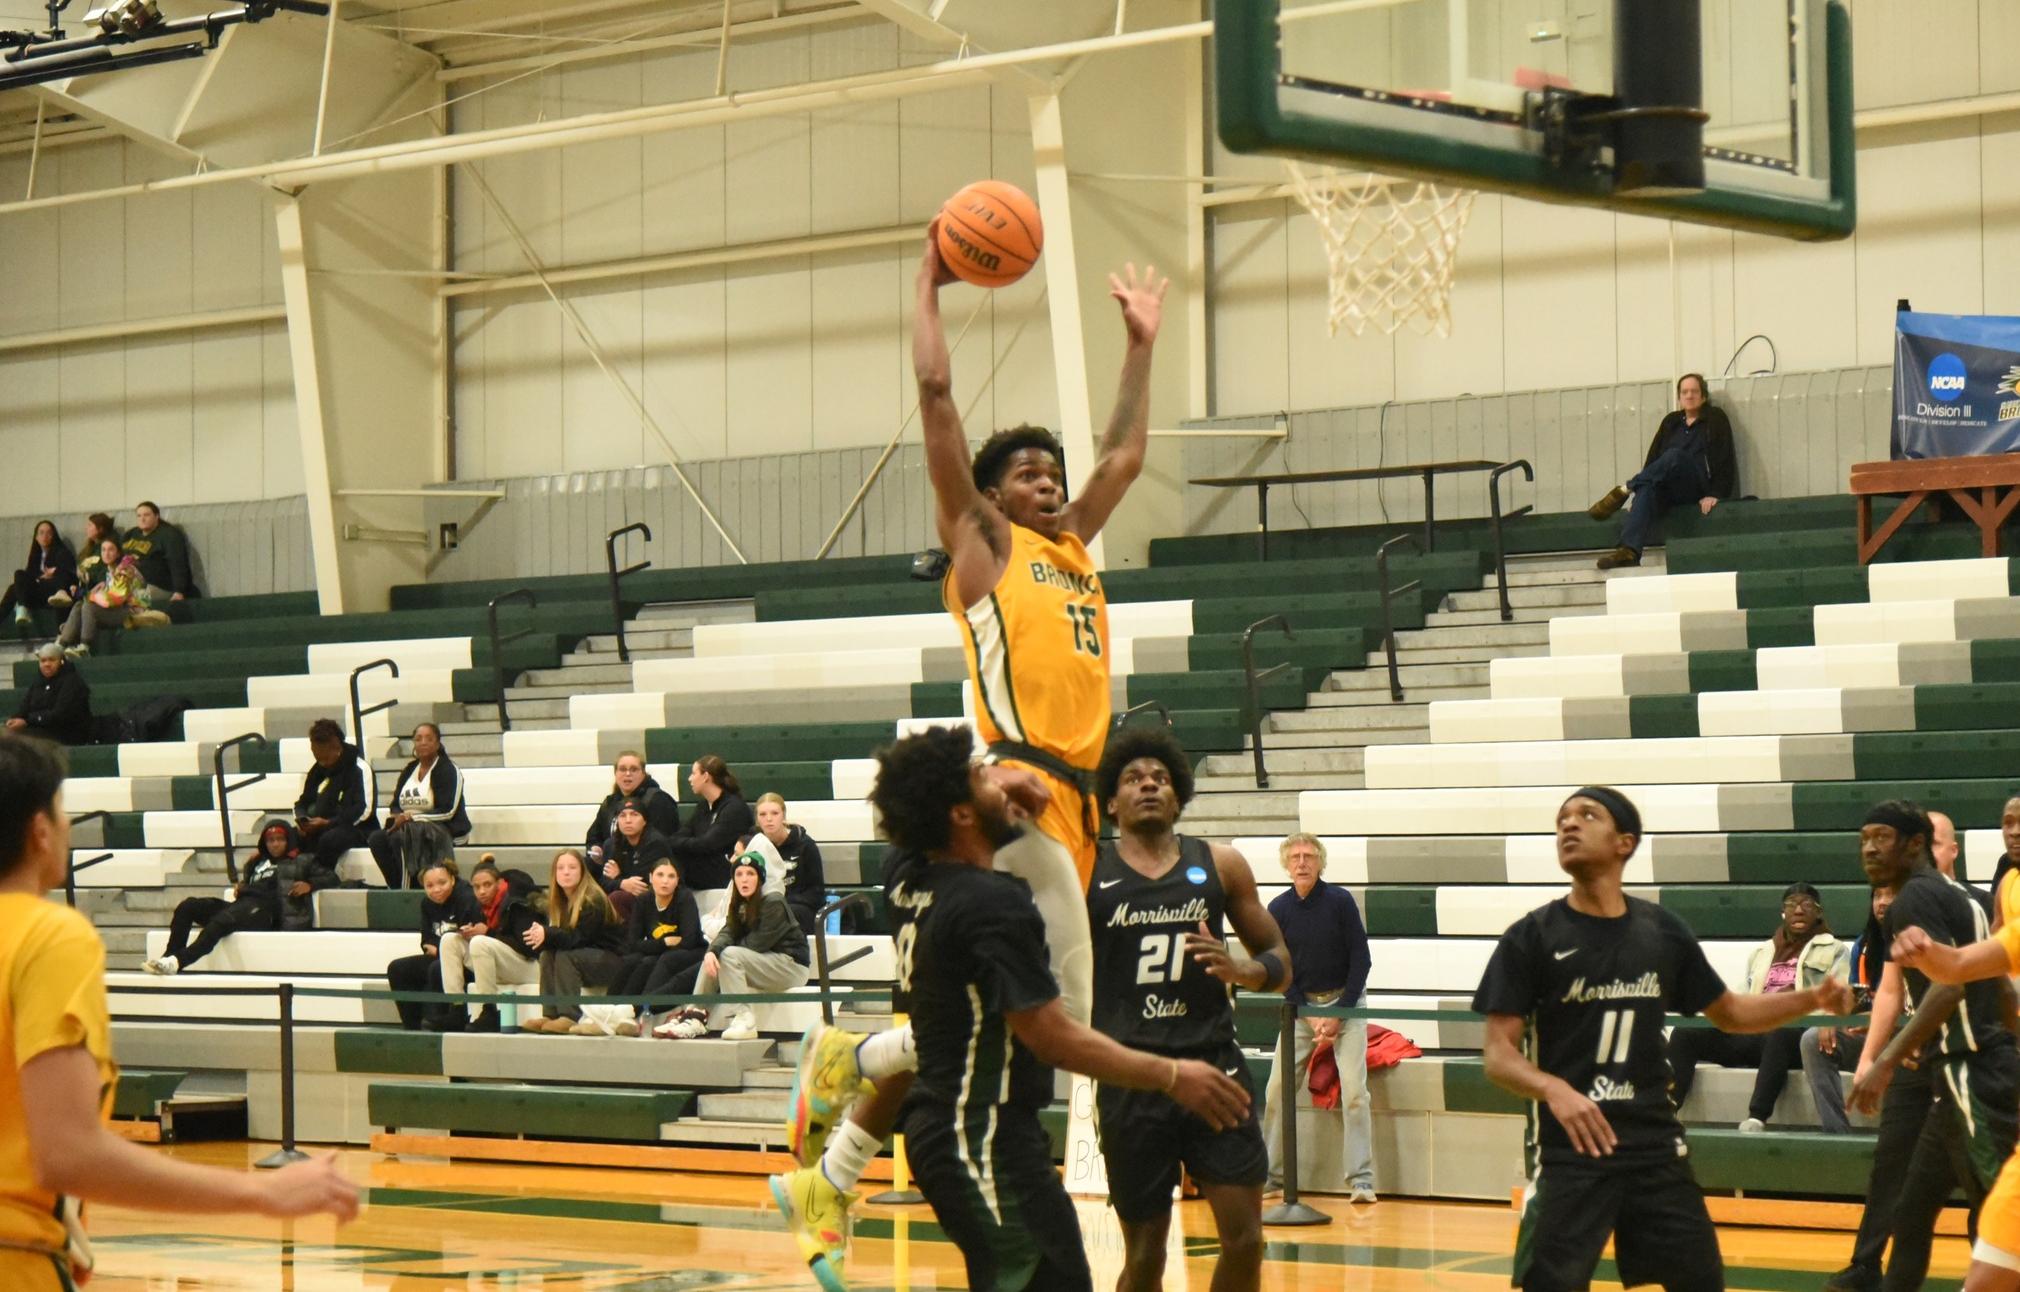 Broncos Cruise past Morrisville St. 95-77; McCarthy Ties Career-High 27 Points